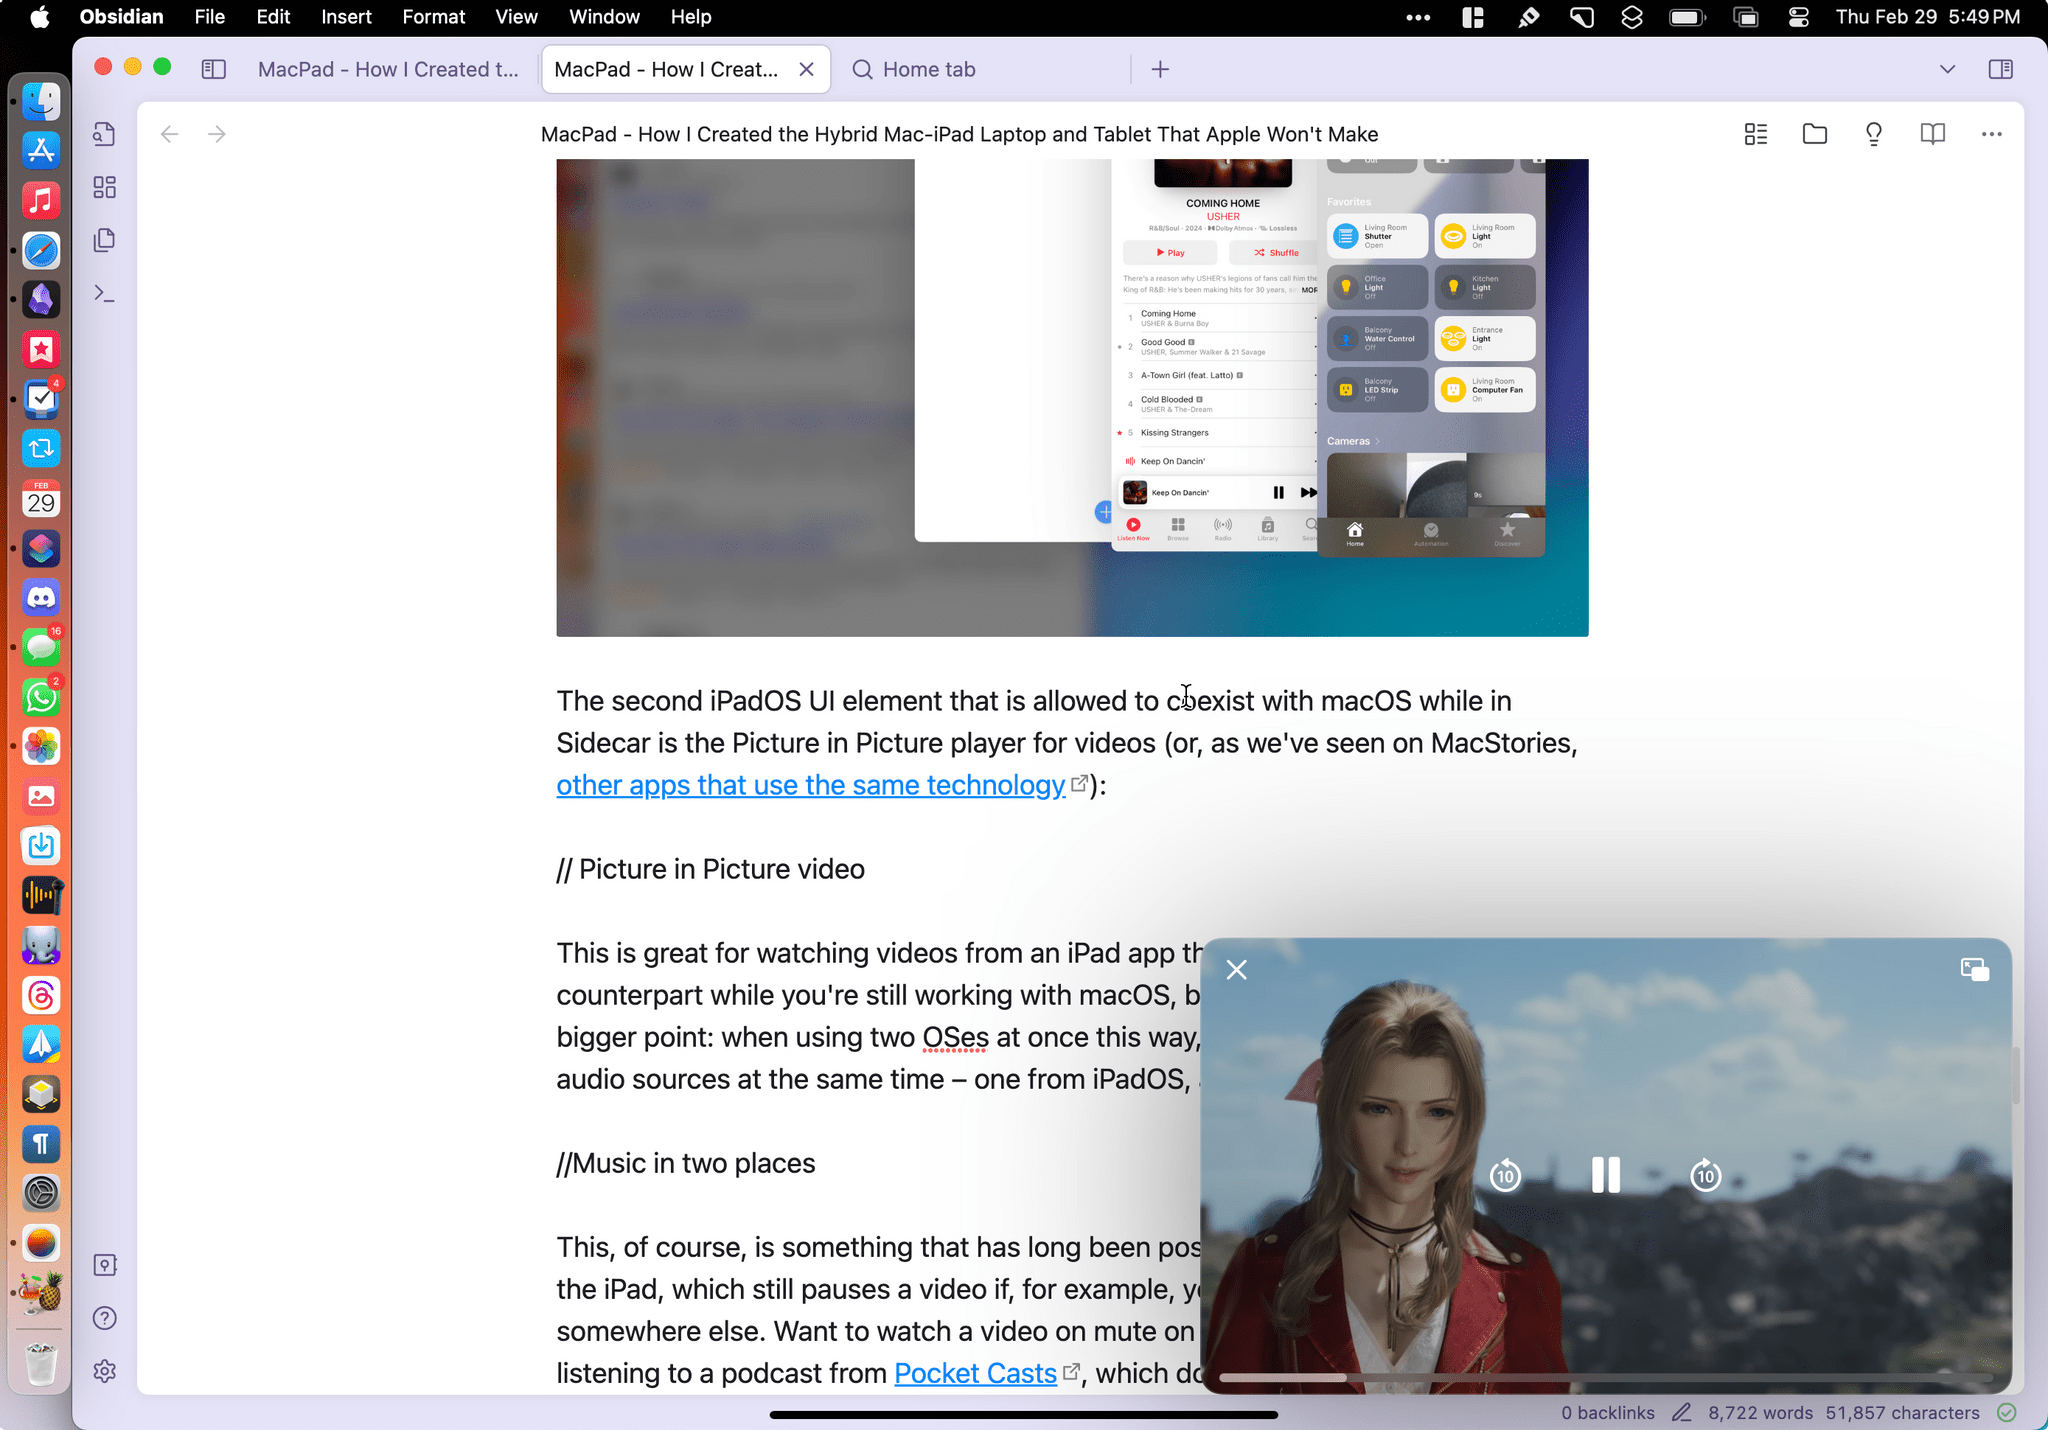 The video in Picture in Picture is from iPadOS.